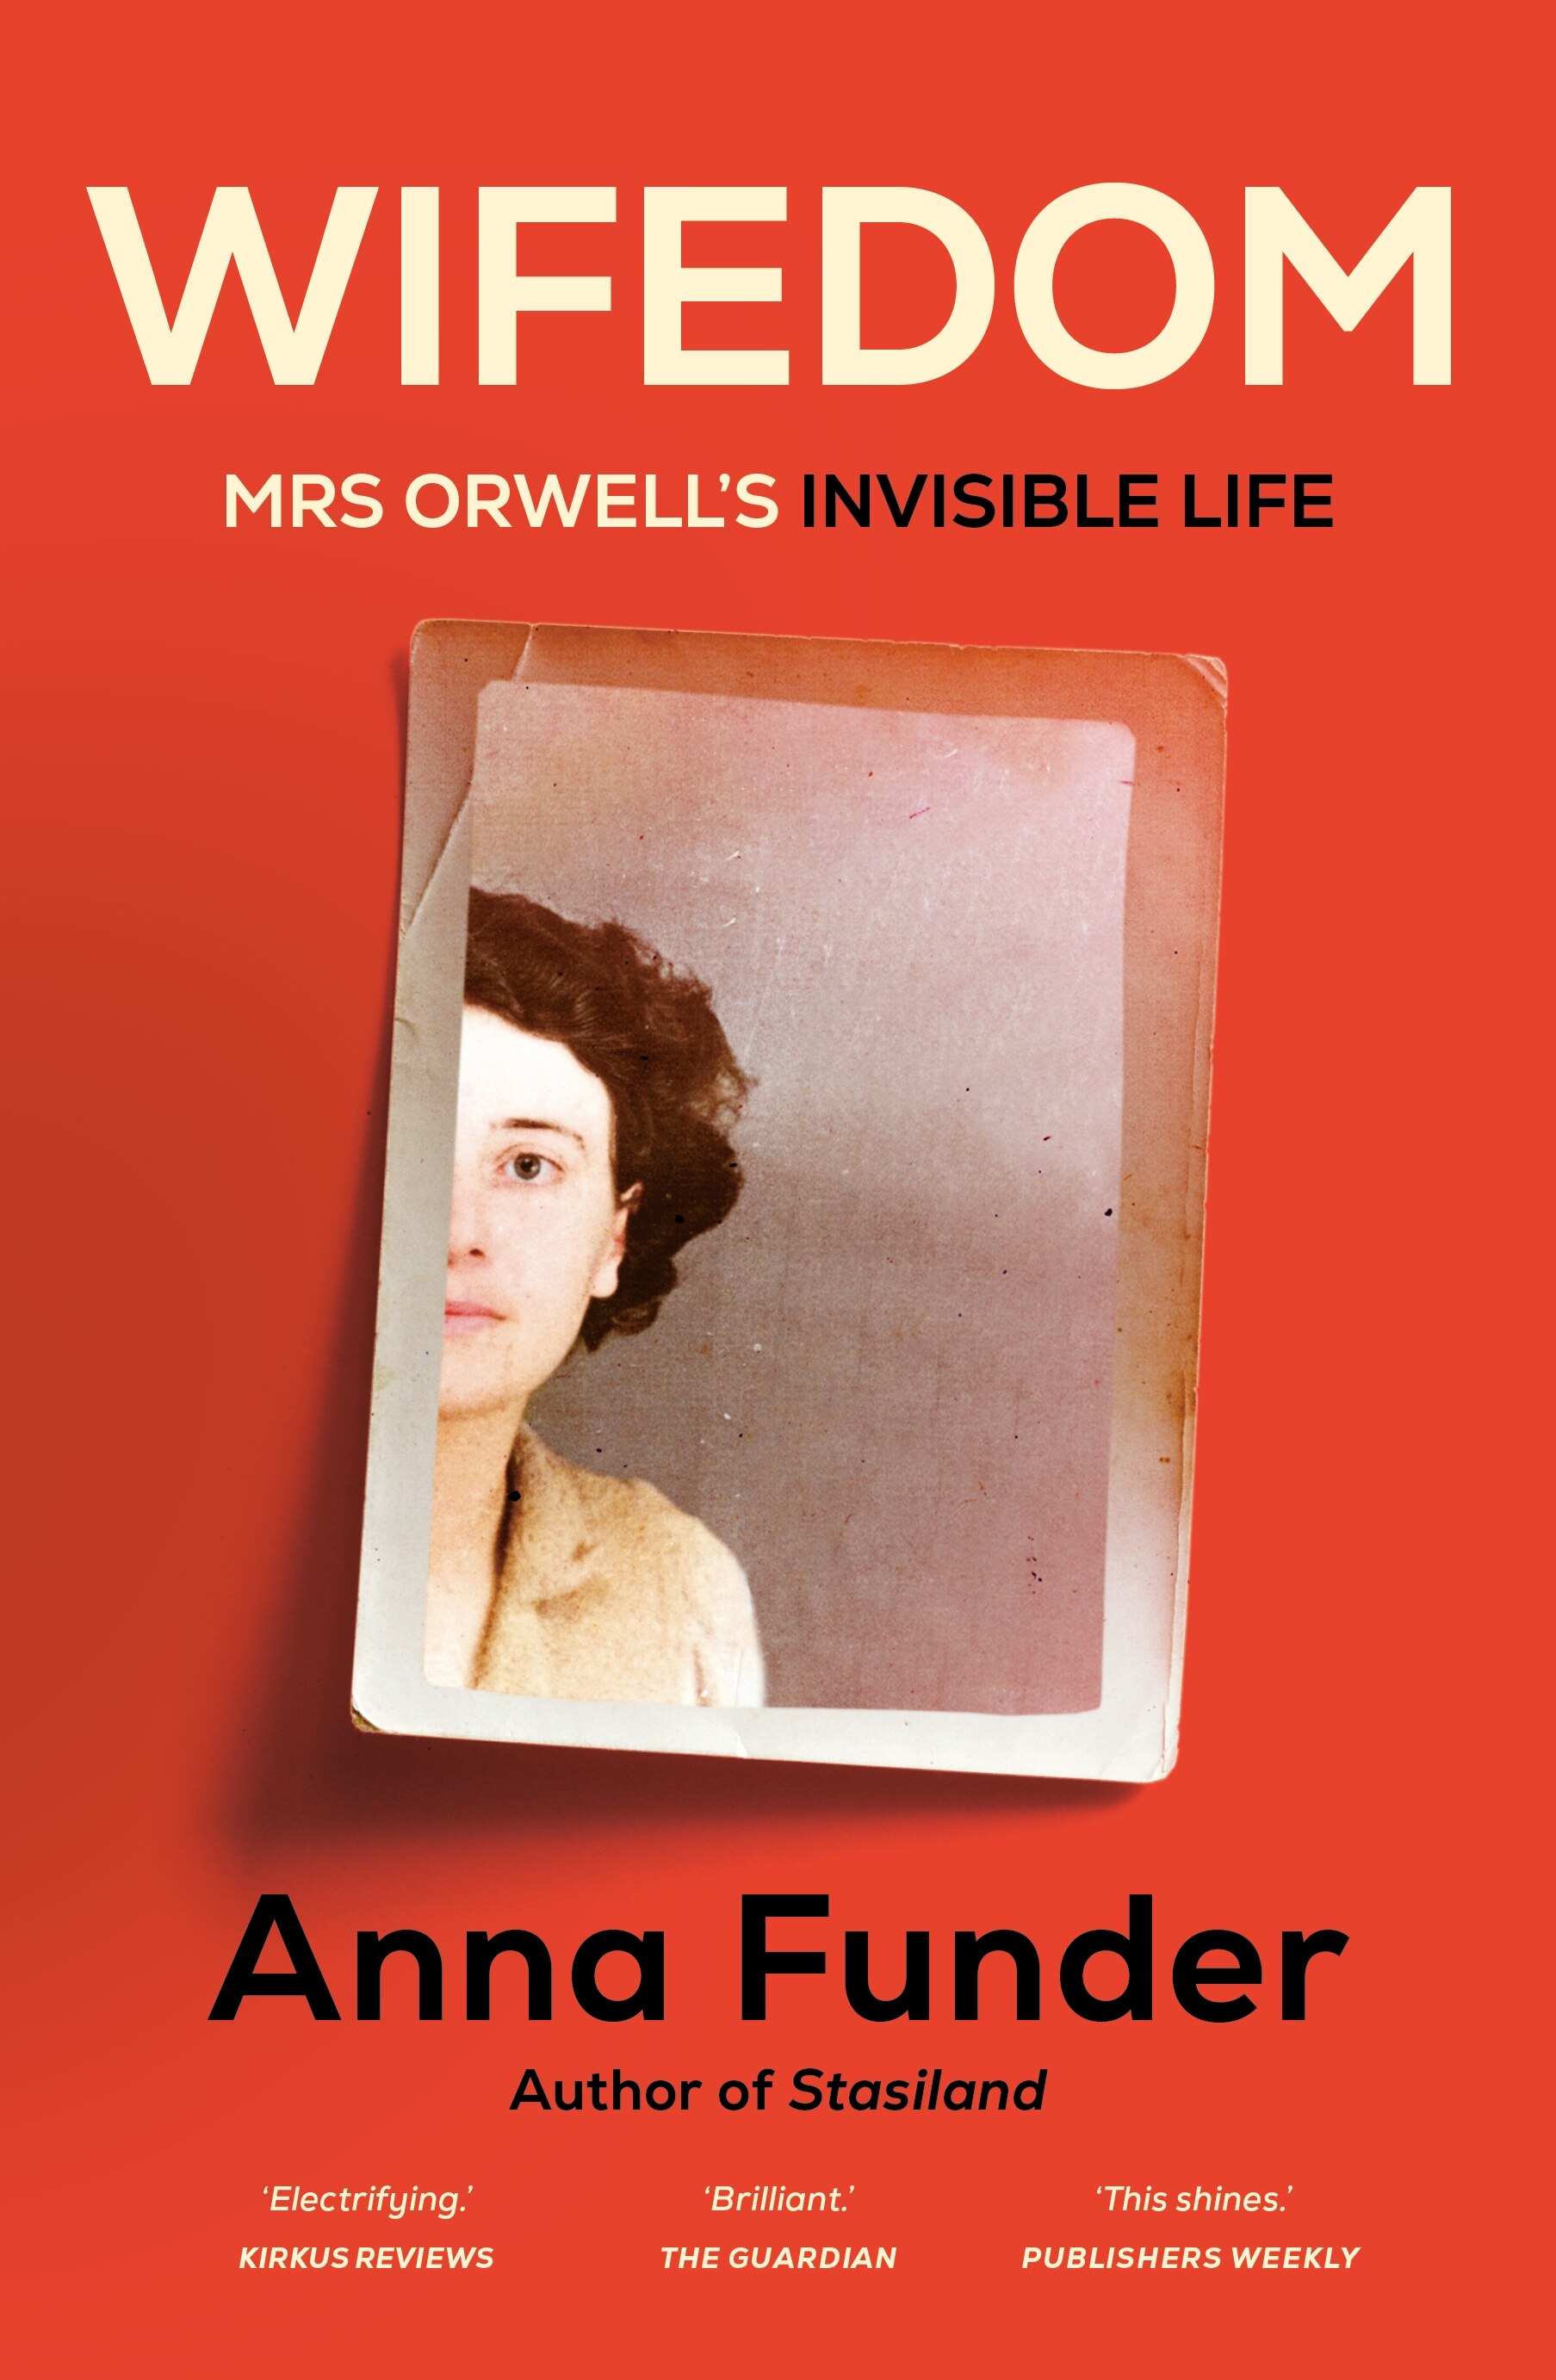 A book cover with an old photograph showing half of a young woman's face, on a red background